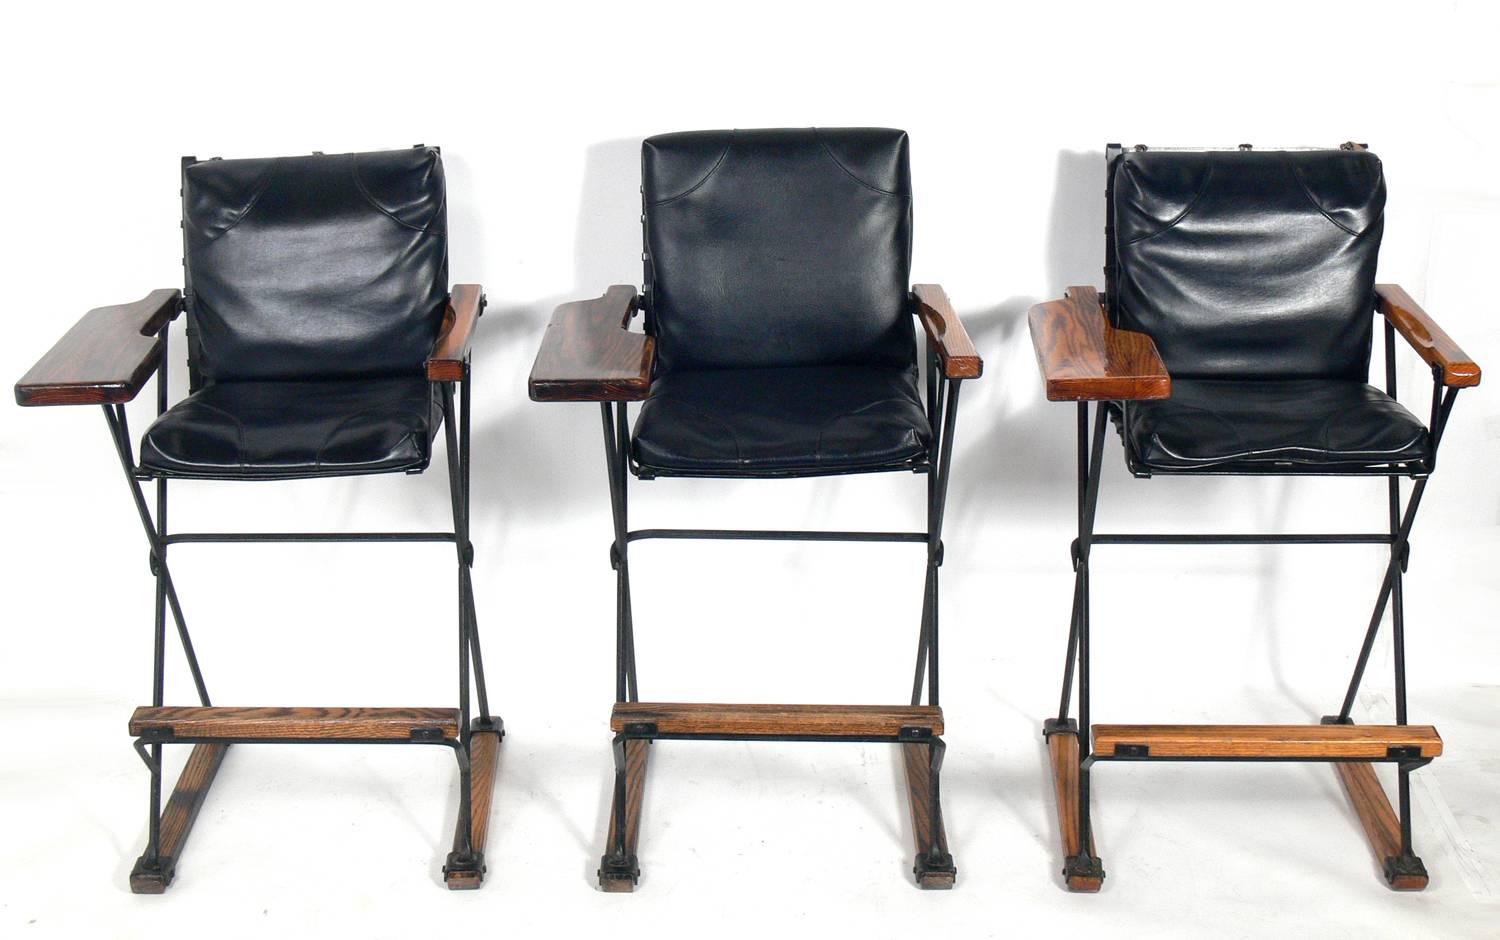 Elegant X-base oak and iron bar or billiard stools, designed by Cleo Baldon for Terra Furniture of California, American, circa 1960s. If you prefer, we can remove the wider billiard arm on the right and replace it with a bar stool arm to match the